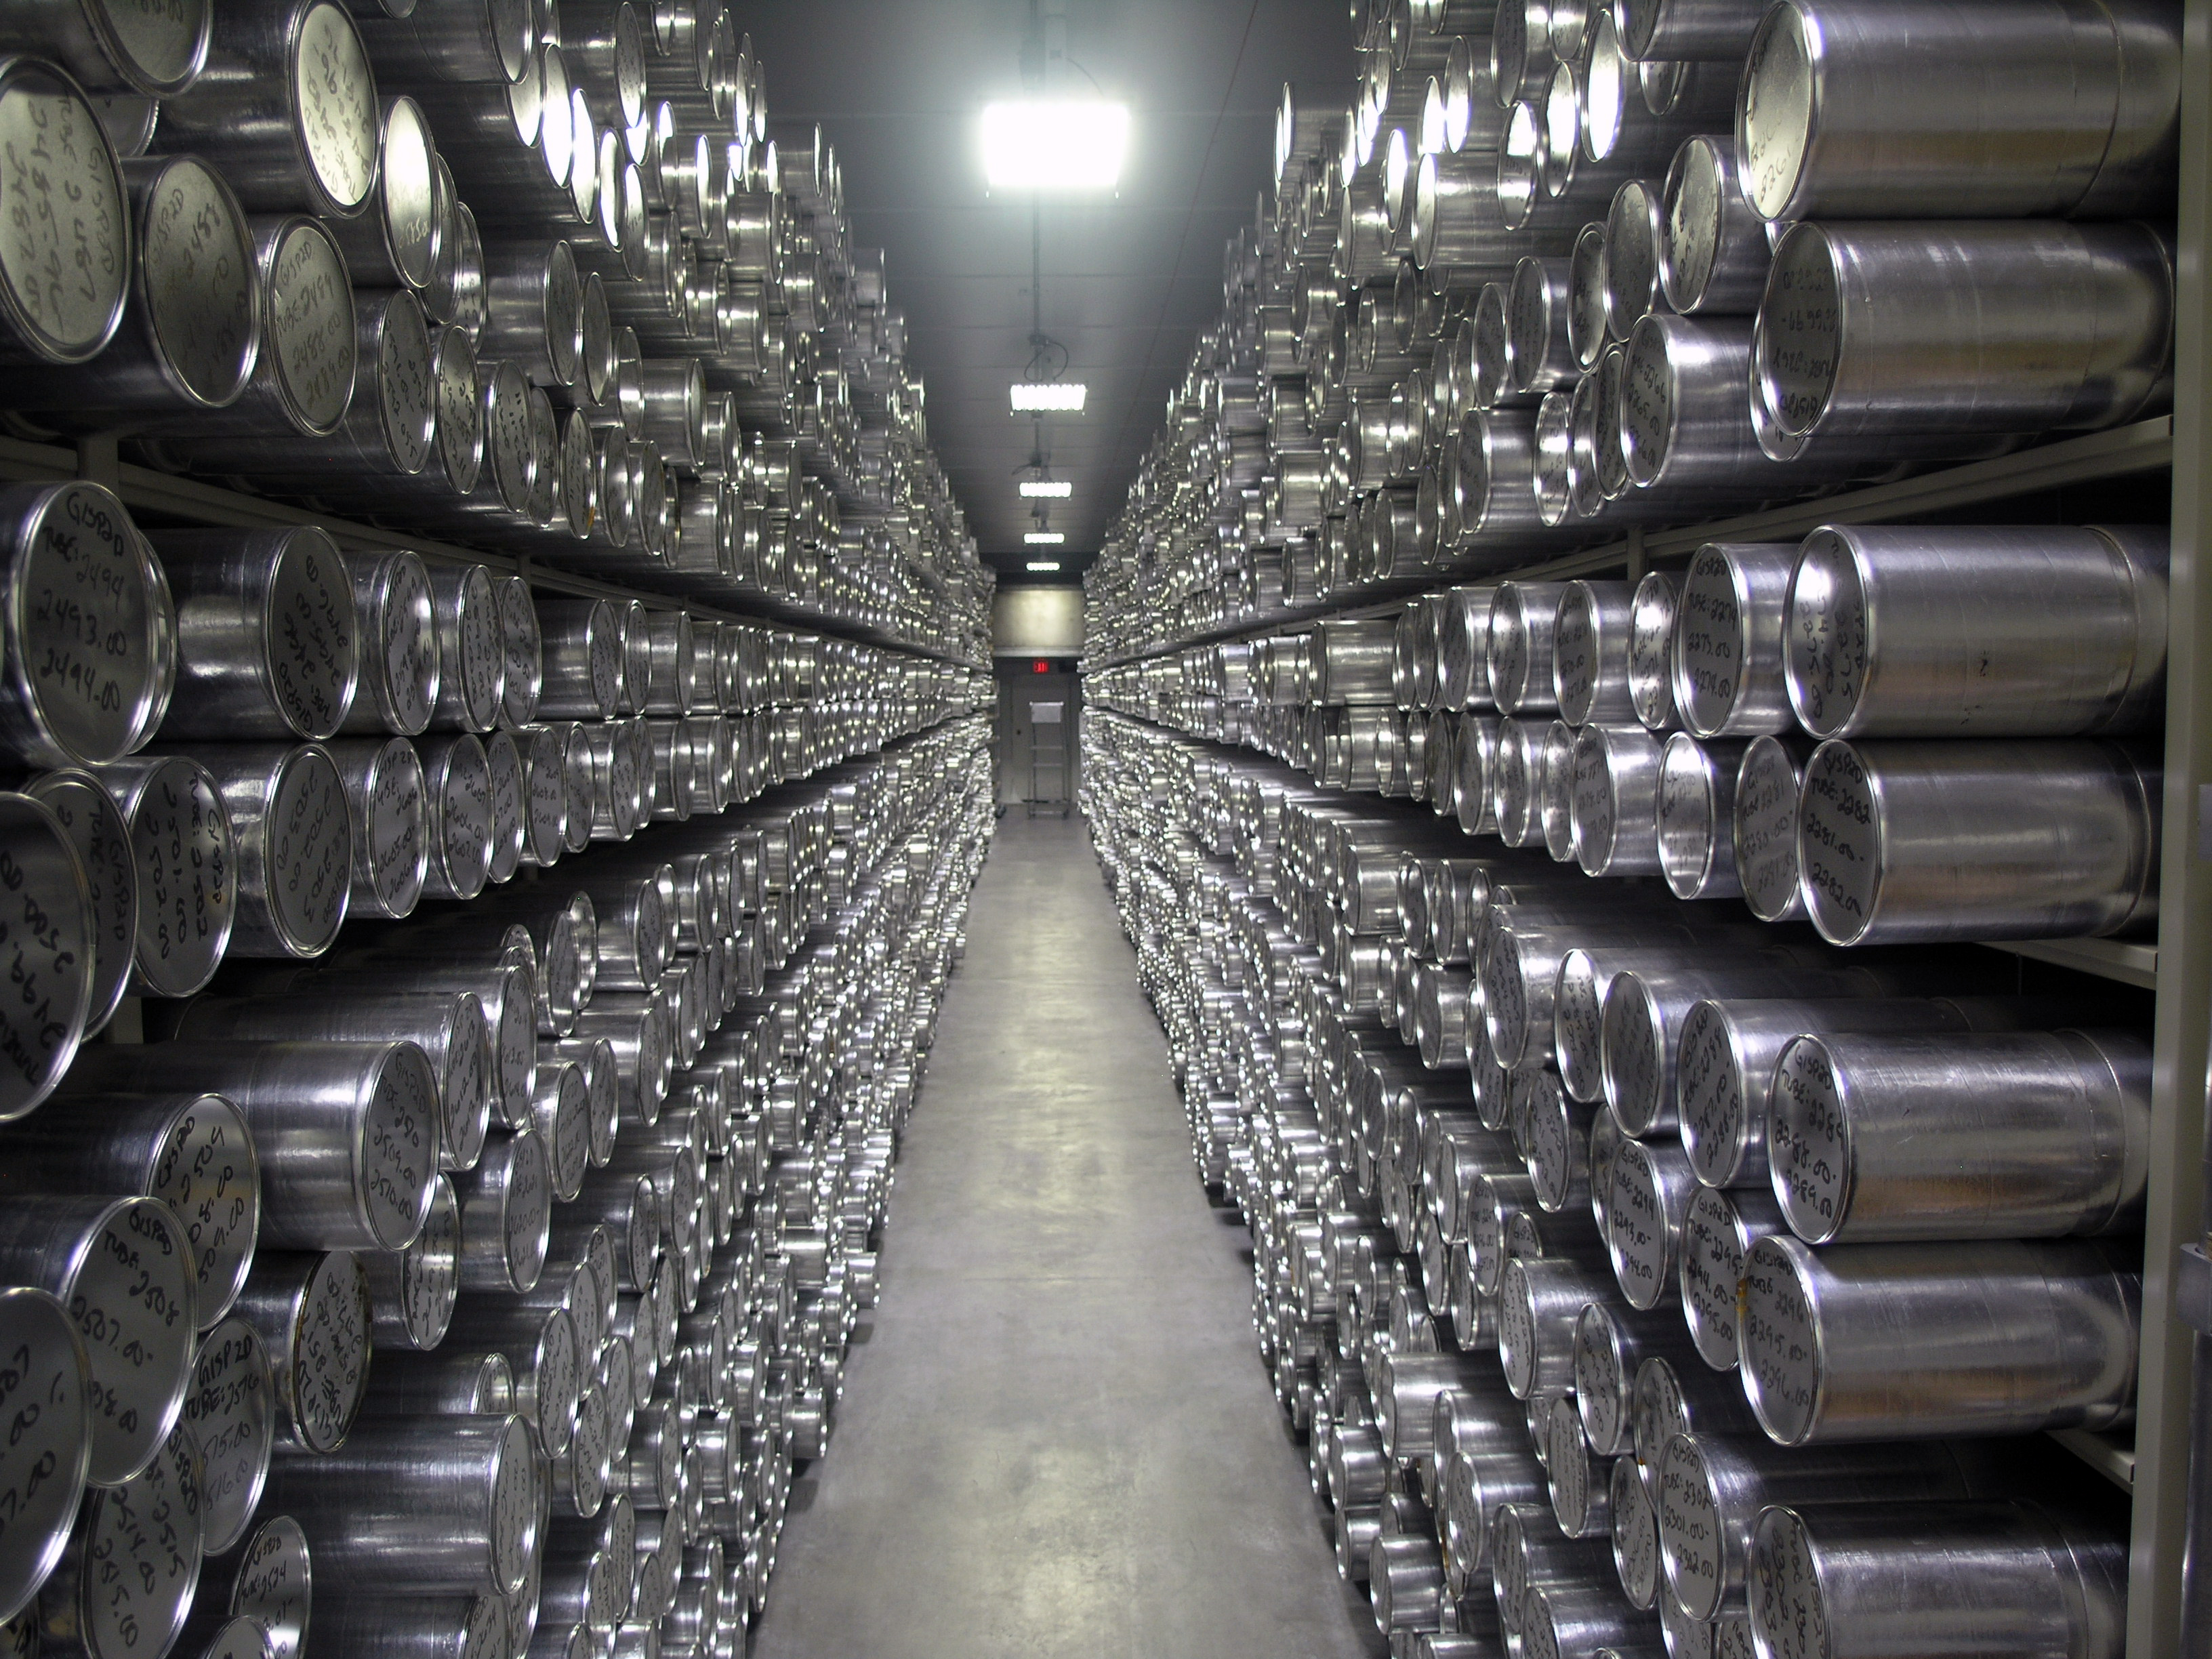 Rows of insulated tubes store ice cores dating back hundreds of thousands of years at the National Ice Core Laboratory's freezer archive